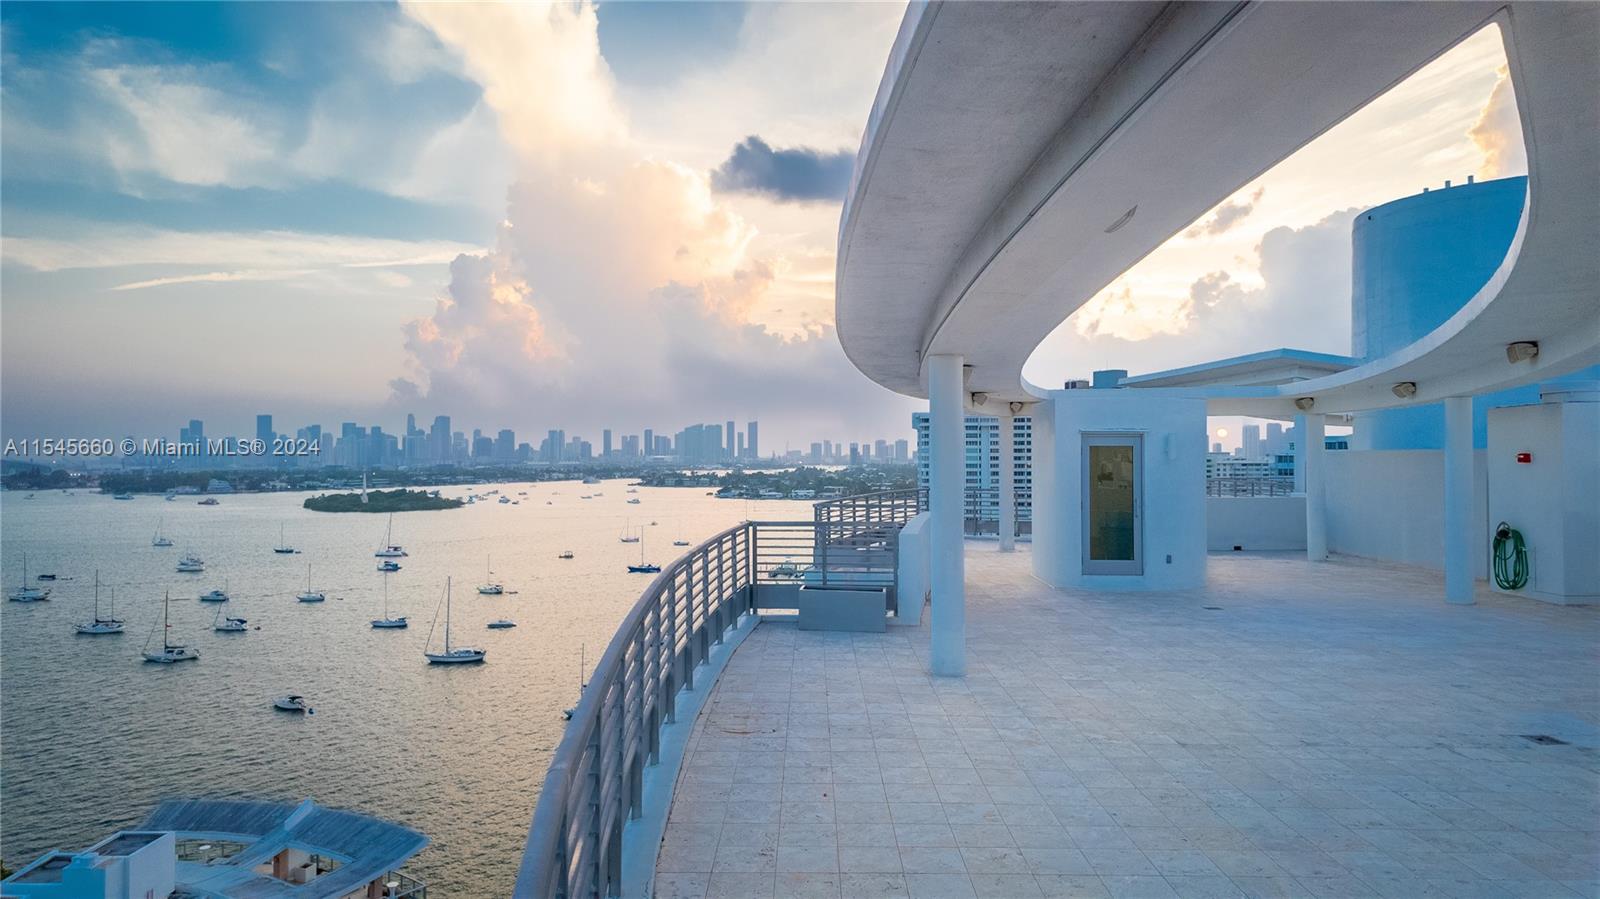 Live limitlessly at the exclusive Capri South Beach! This stunning South corner Penthouse boasts a breathtaking 270-degree view of Biscayne Bay, Downtown Miami, & of Miami Beach. With 1,919SF of pure elegance & sophistication, 11ft ceilings, & 75'Ft Boat Dock, this 2 bed, 2.5 bath PH is the epitome of luxury living. Designed w/ the entertainer's dream in mind, this unit caters to all lifestyles. The 2,400SF+/- private rooftop oasis is perfect for hosting any sized gathering. Enjoy the stunning renovated kitchen w/ Subzero & Miele, open-concept living, & separate dining room. The main bedroom is spacious, w/ walk-in closets & a spa-like bath w/ separate shower & soaking tub. Perfectly located next to shopping, dining & entertainment while still offering a peaceful place to call home!